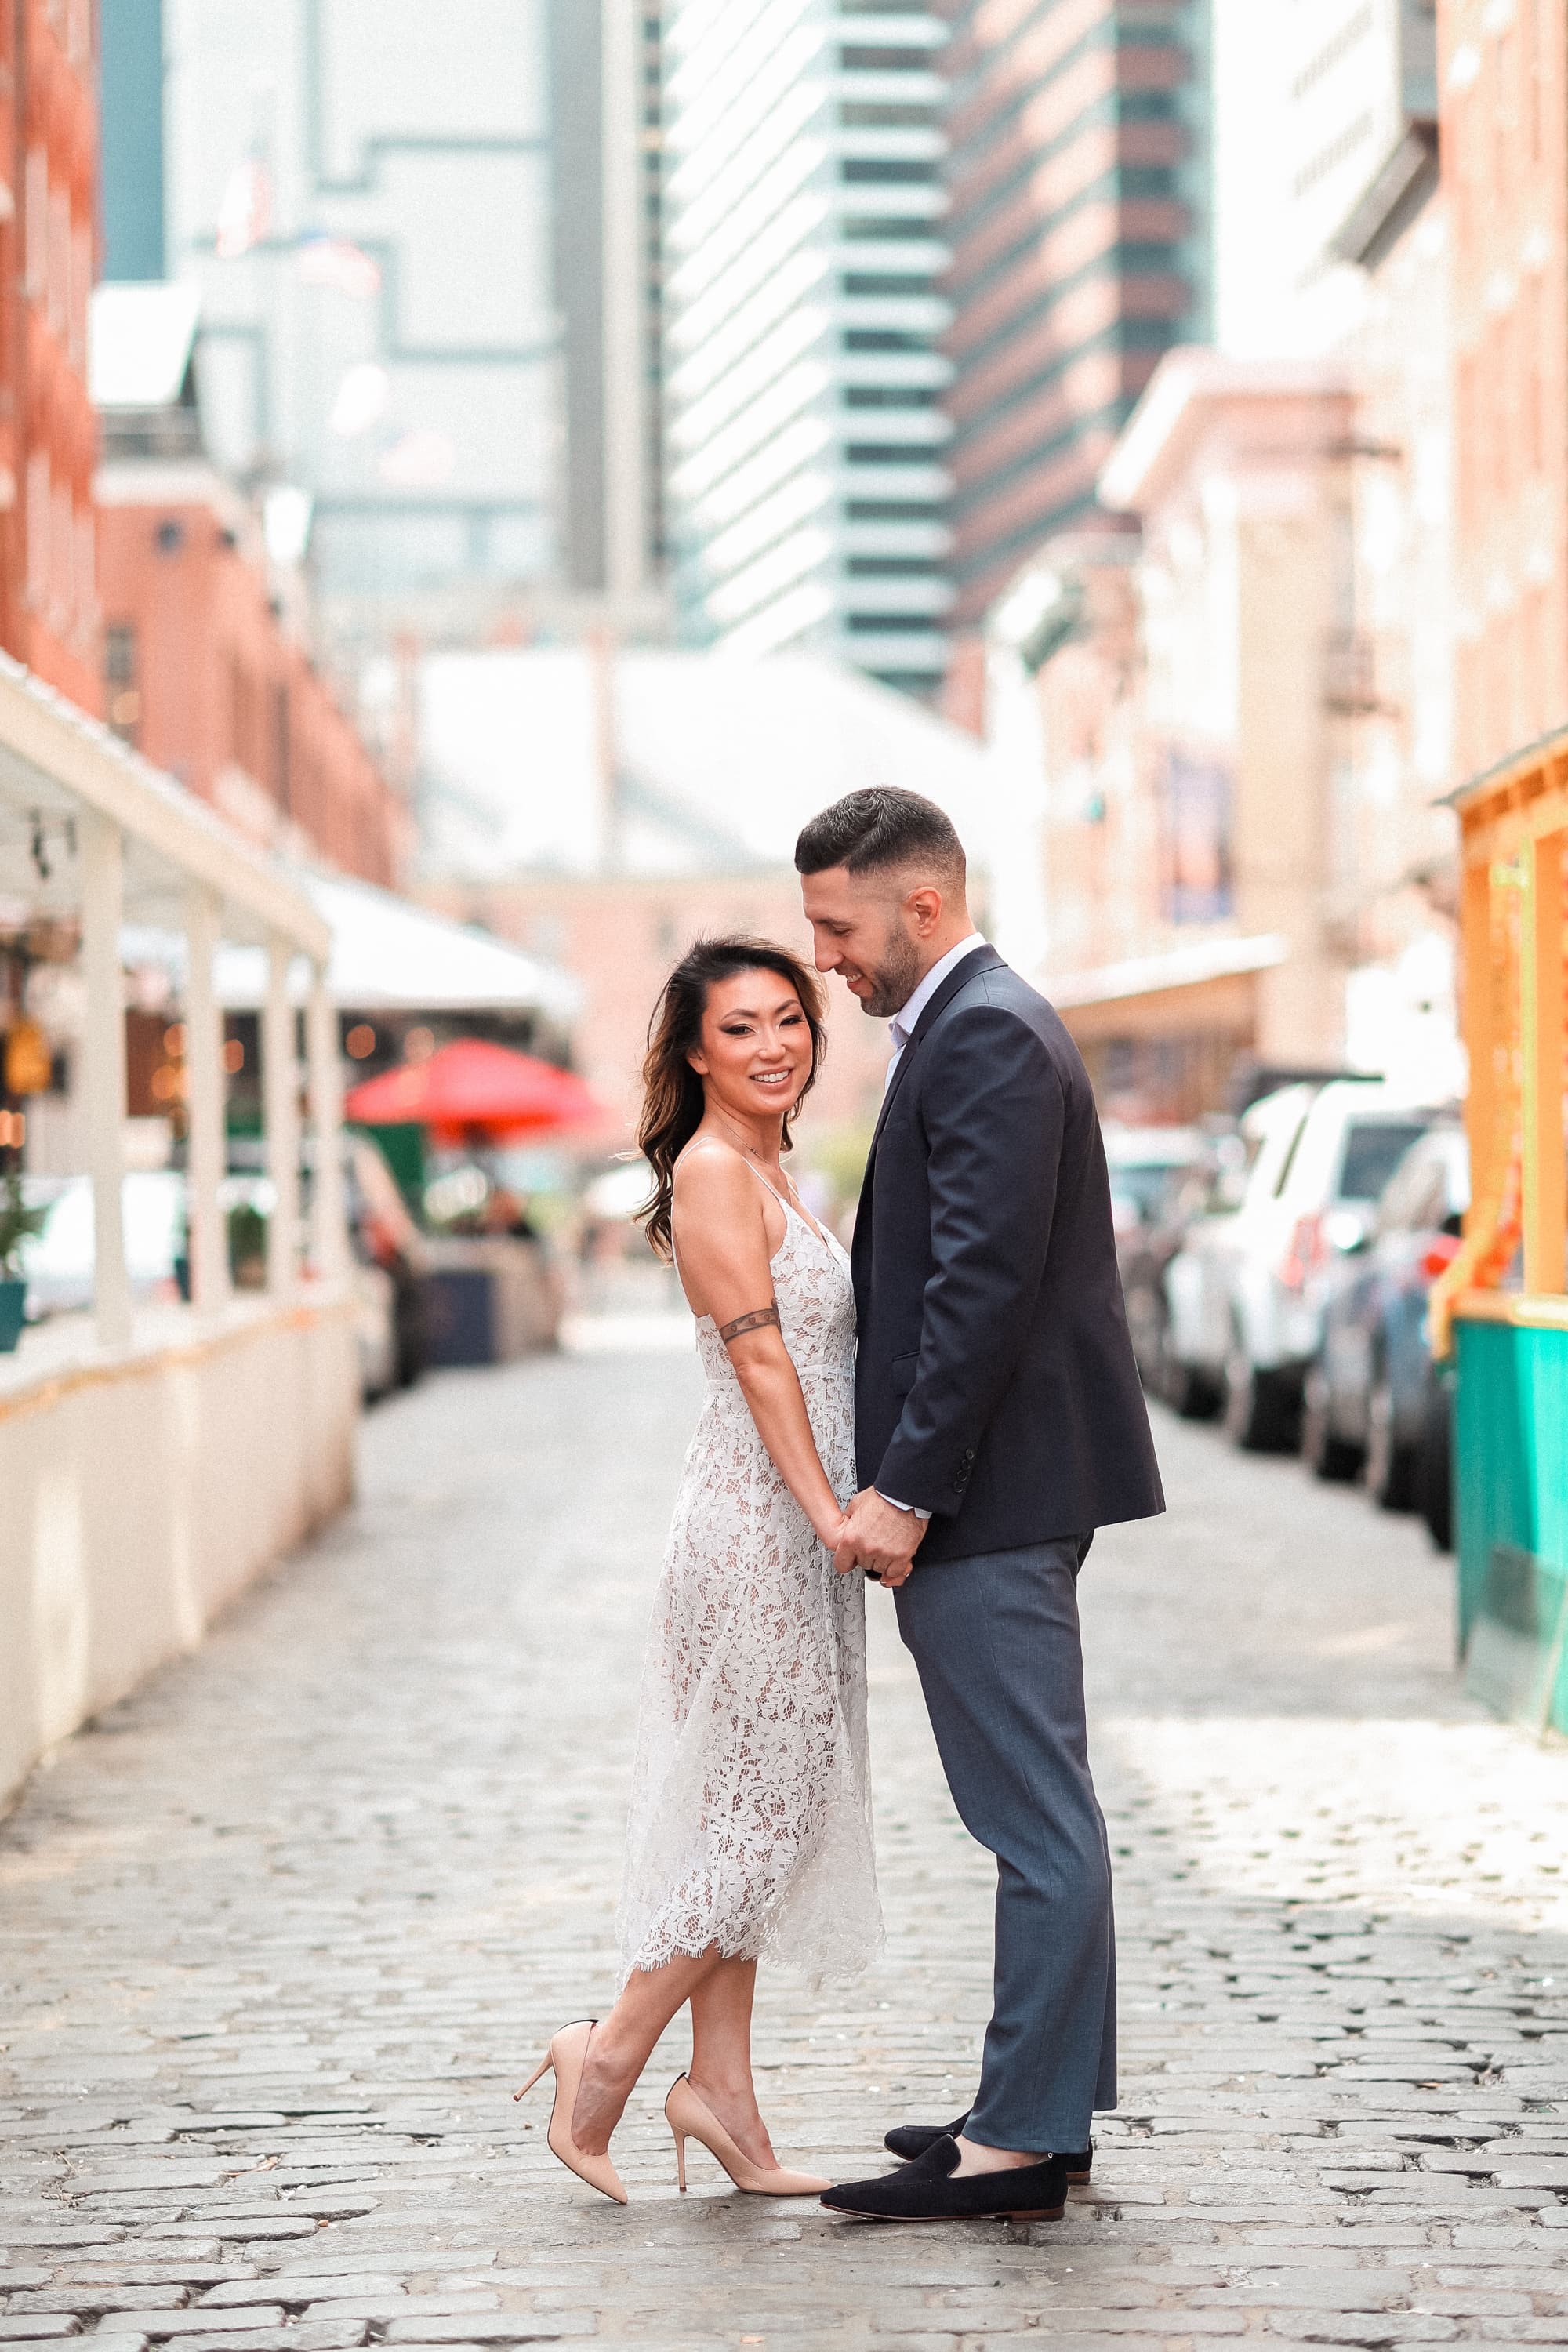 Why You Should Consider Engagement Photos: Unveiling the Benefits